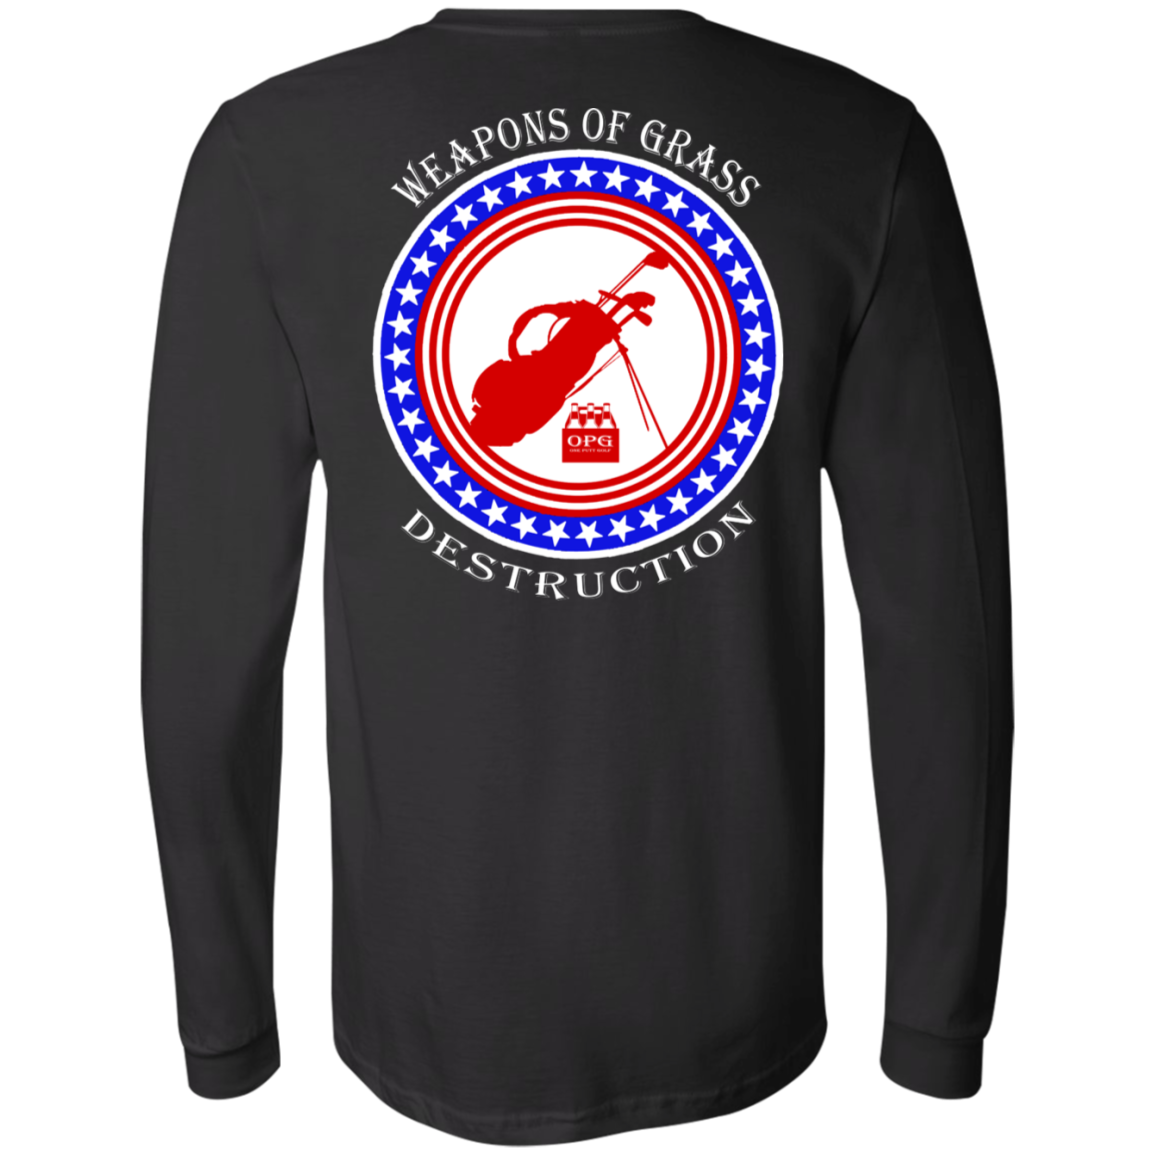 OPG Custom Design #18. Weapons of Grass Destruction. Men's 100% Combed and Ringspun Cotton